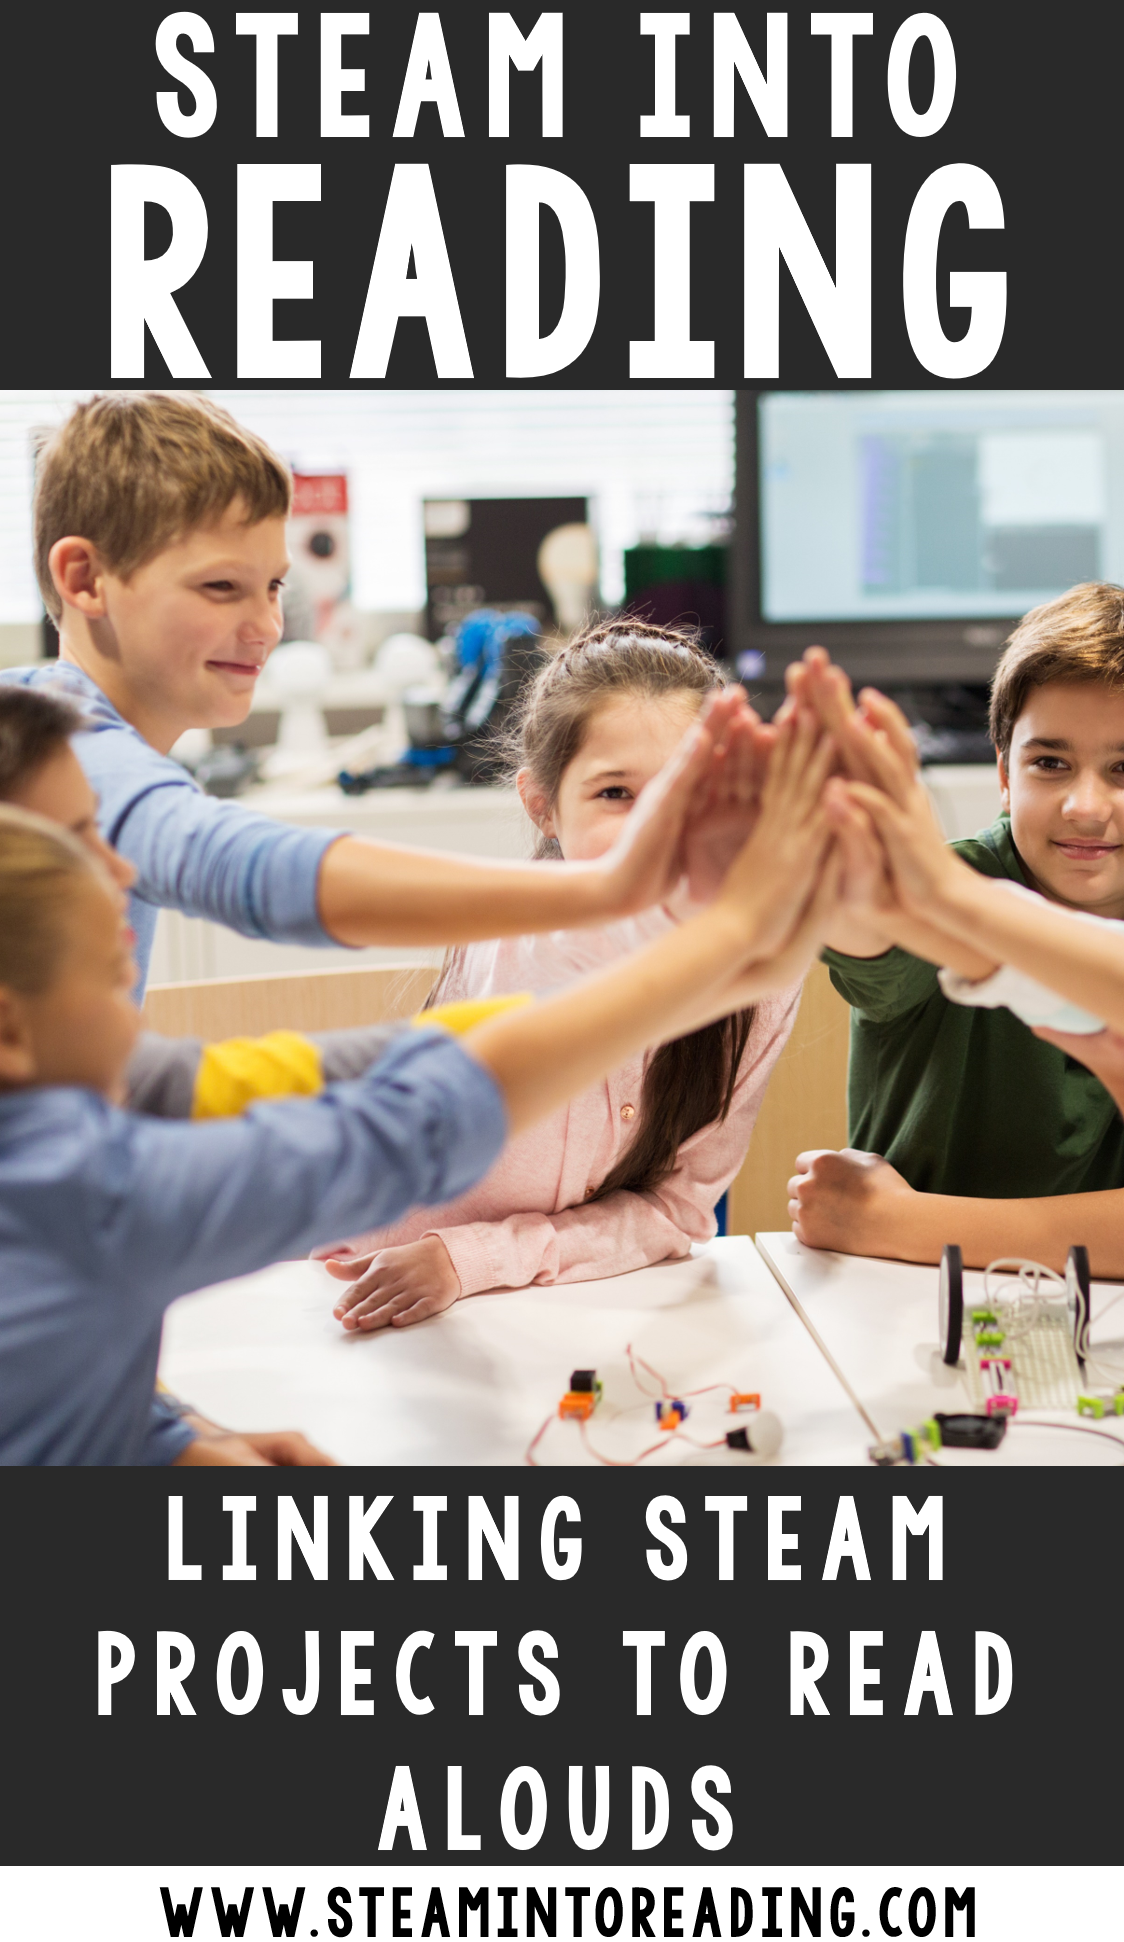 STEAM Into Reading: Linking Reading to STEAM - Mr. Mault's Marketplace